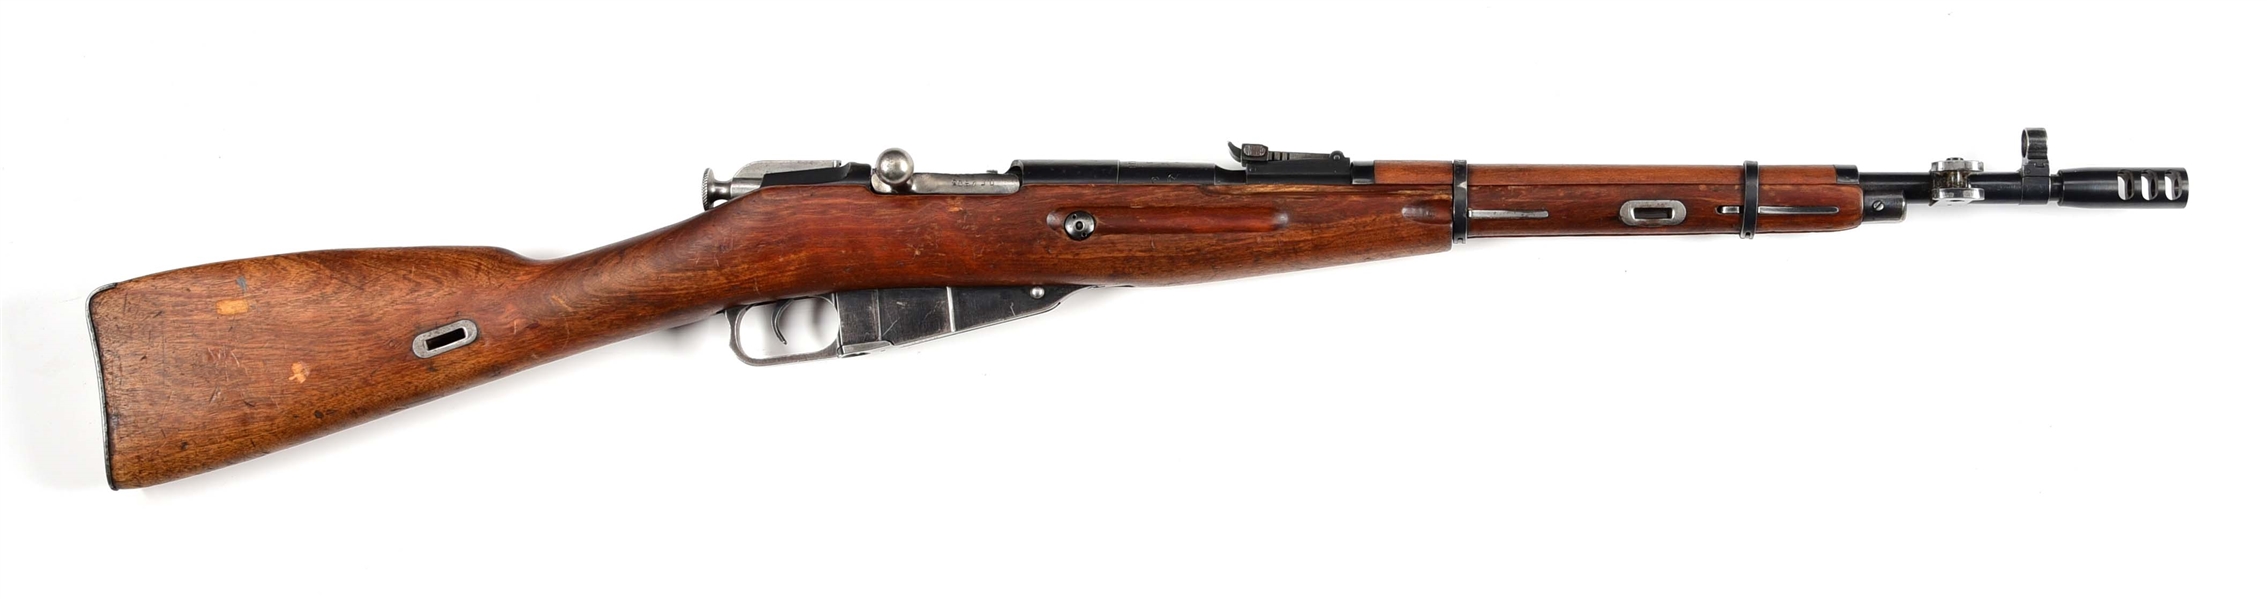 (C) CHINESE CONTRACT M53 NAGANT BOLT ACTION RIFLE.